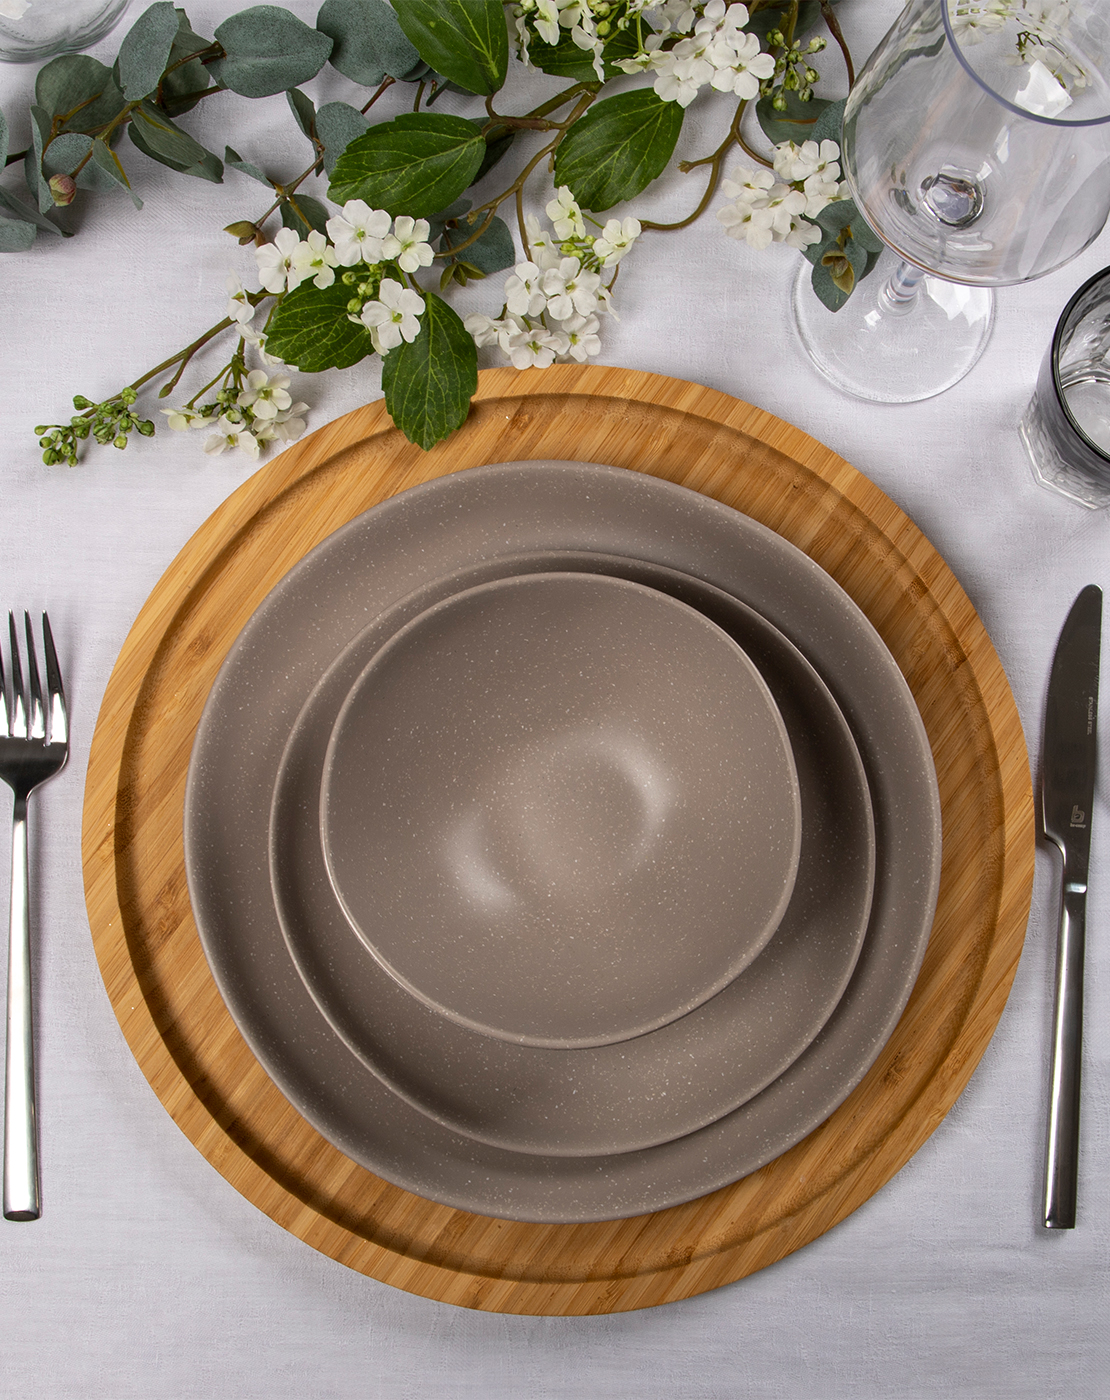 Bo-Camp - Urban Outdoor collection - Tableware - Hoxton - Melamine - 16 Pieces - Beige detail 6